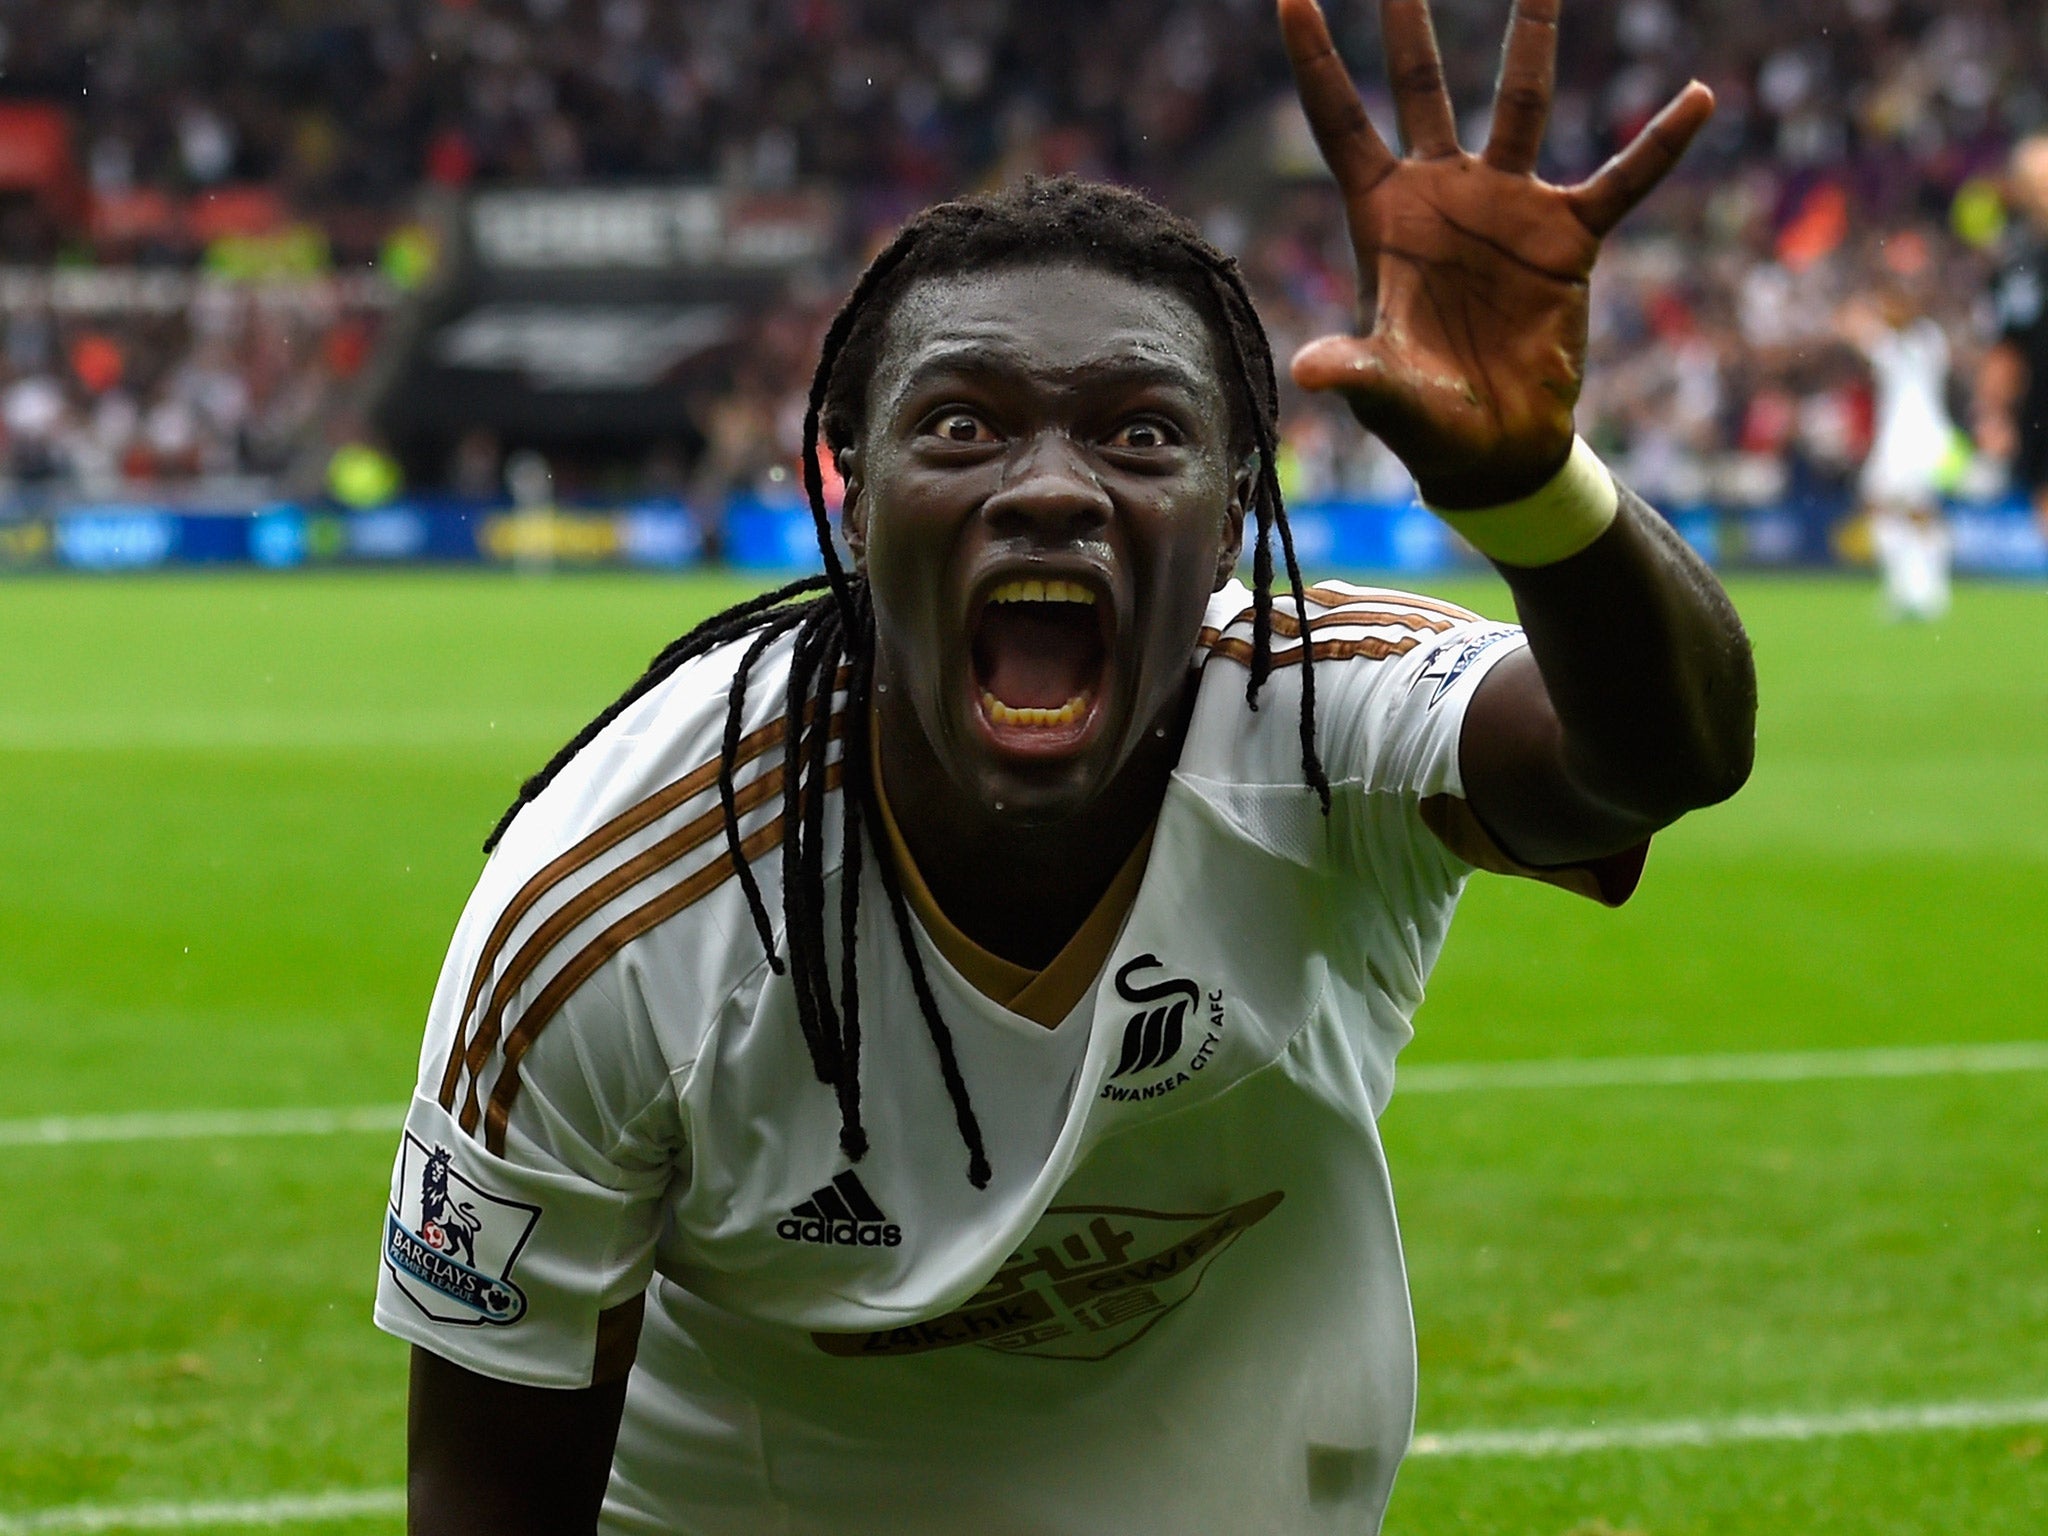 Gomis' frankly wonderful celebration couldn't save him